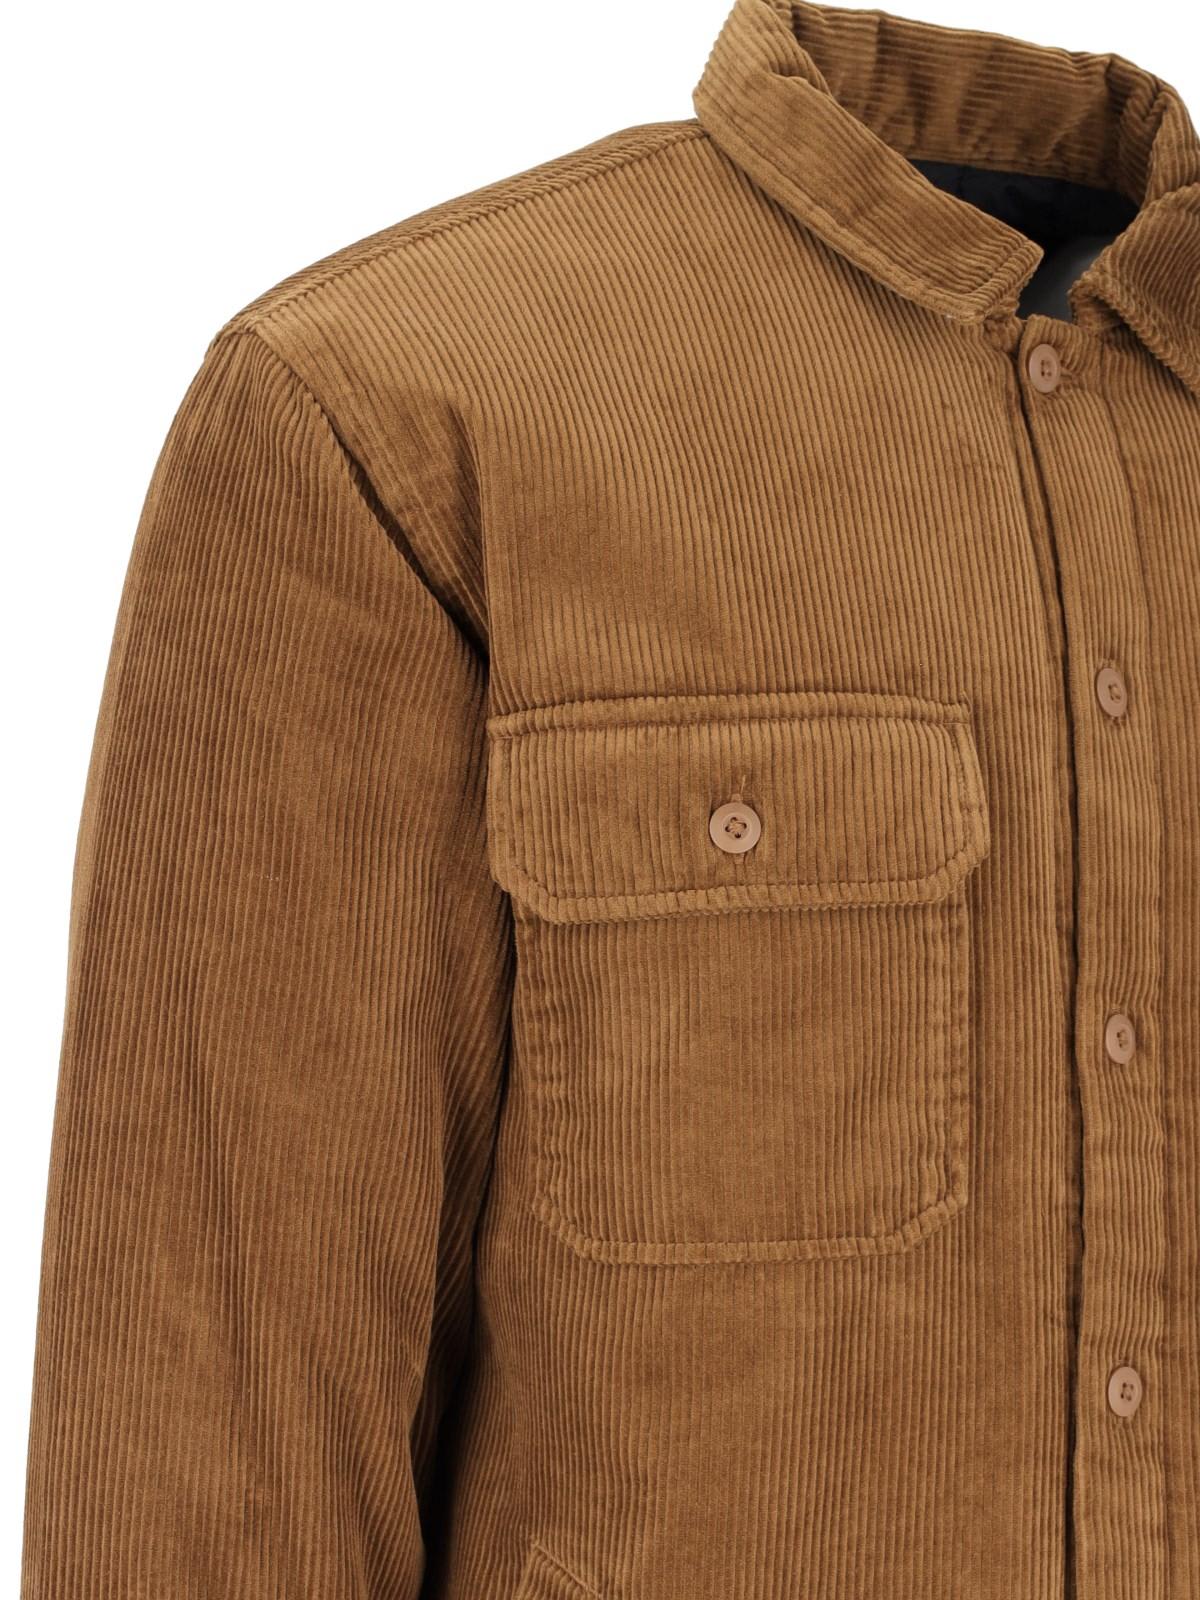 Carhartt Whitsome Jacket In Nf.xx Deep H Brown